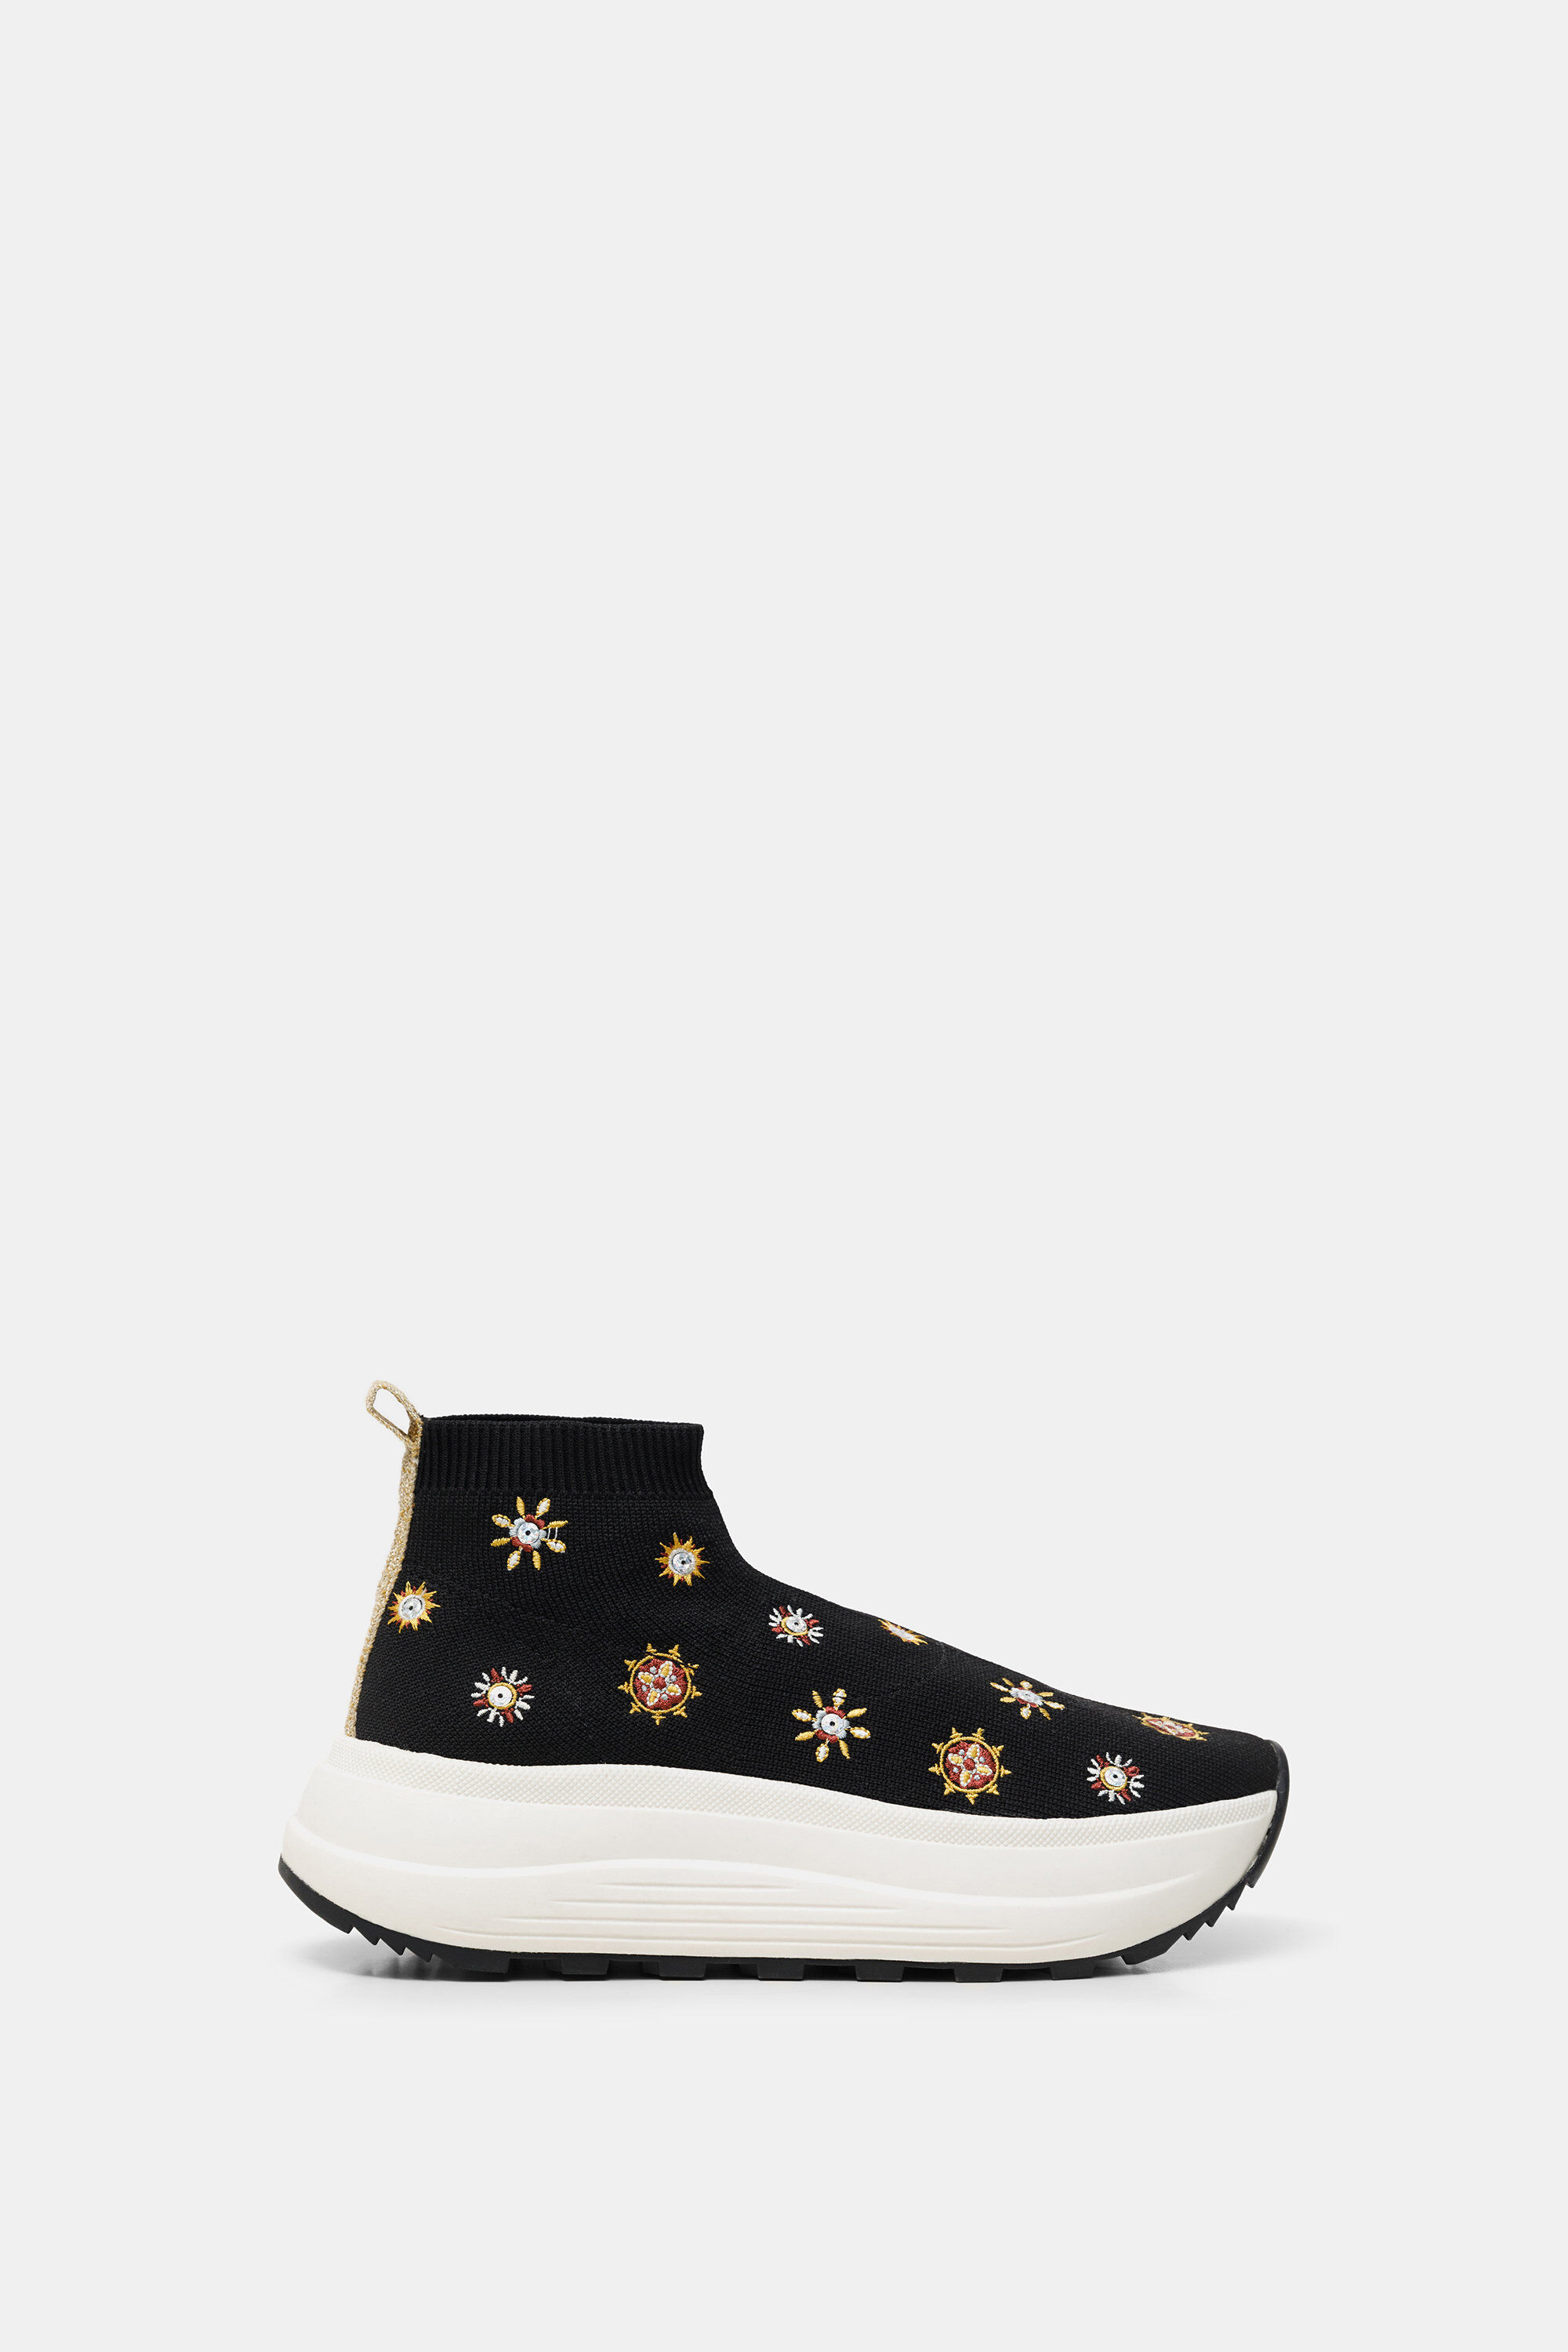 Sock sneakers embroidered wedge 